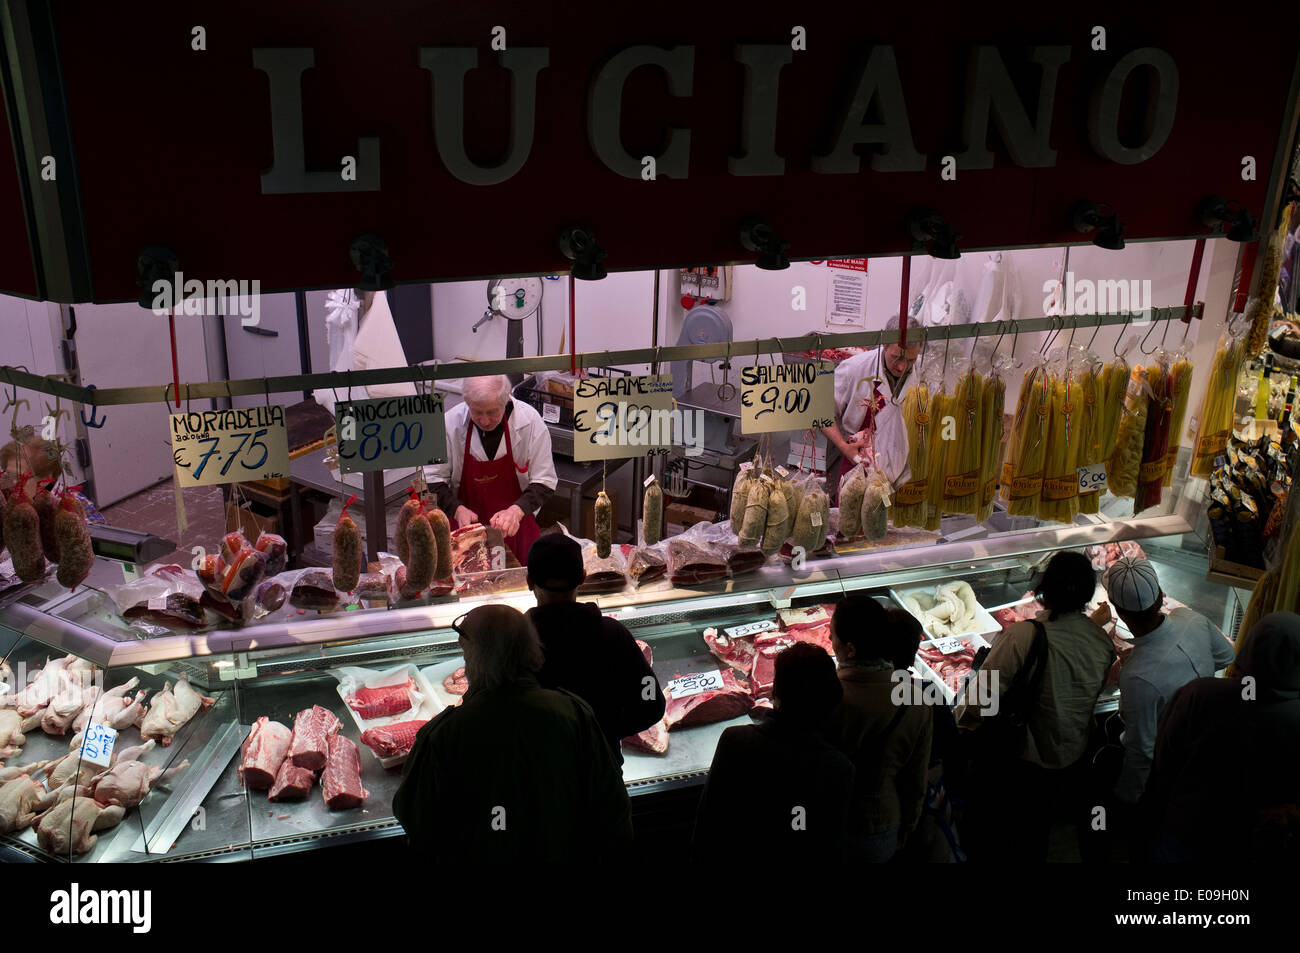 A butcher sells meat at Luciano's meat stand in the Mercato Centrale di San Lorenzo Market, offering primary ingredients of Tusc Stock Photo